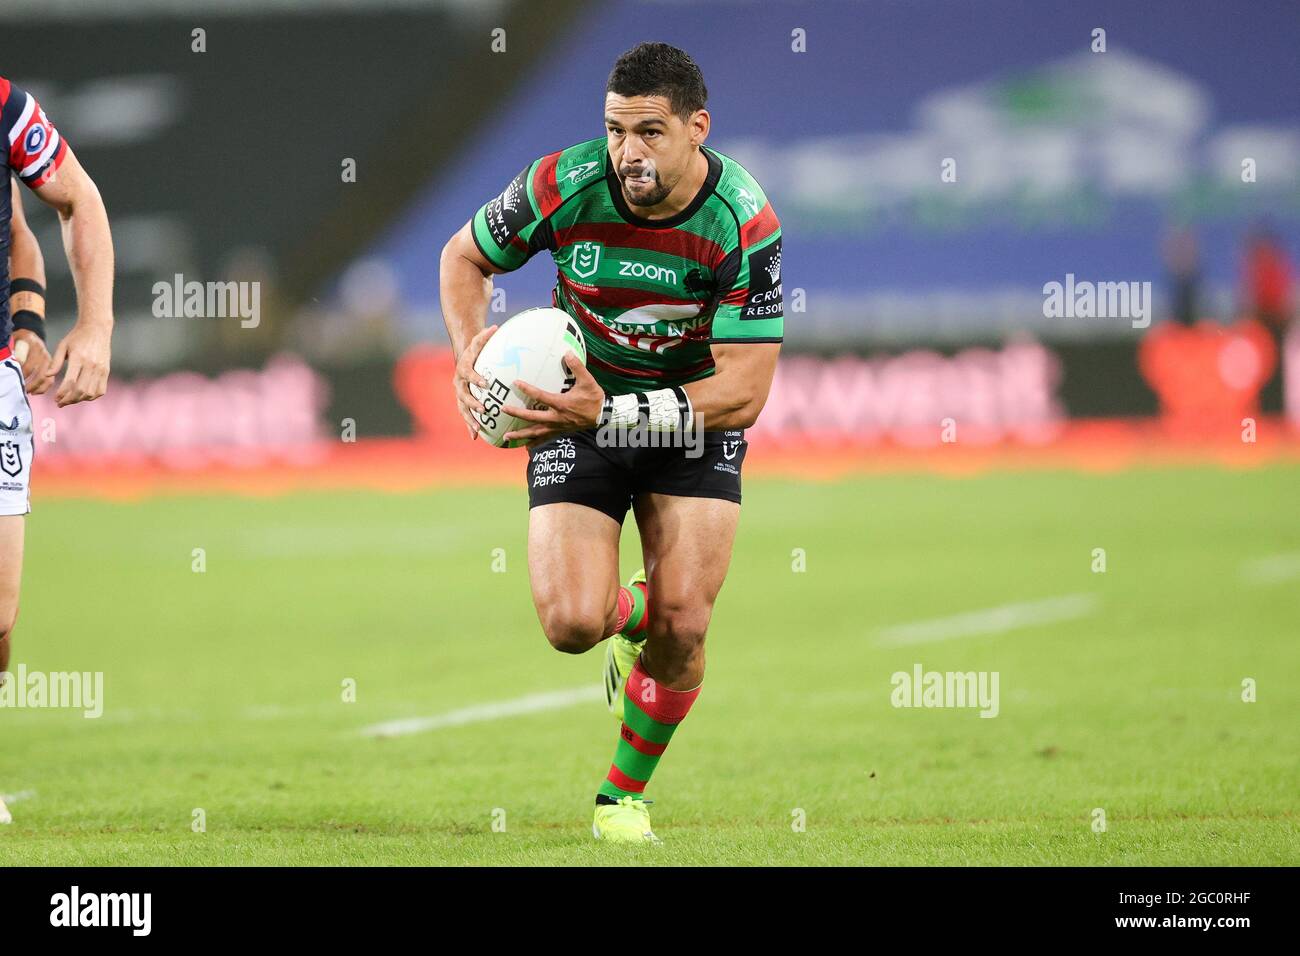 SYDNEY, AUSTRALIA - MARCH 26: Cody Walker of the Rabbitohs about to score a try during the round three NRL match between the South Sydney Rabbitohs and Sydney Roosters at Stadium Australia on March 26, 2021 in Sydney, Australia.  Credit: Pete Dovgan/Speed Media/Alamy Live News Stock Photo